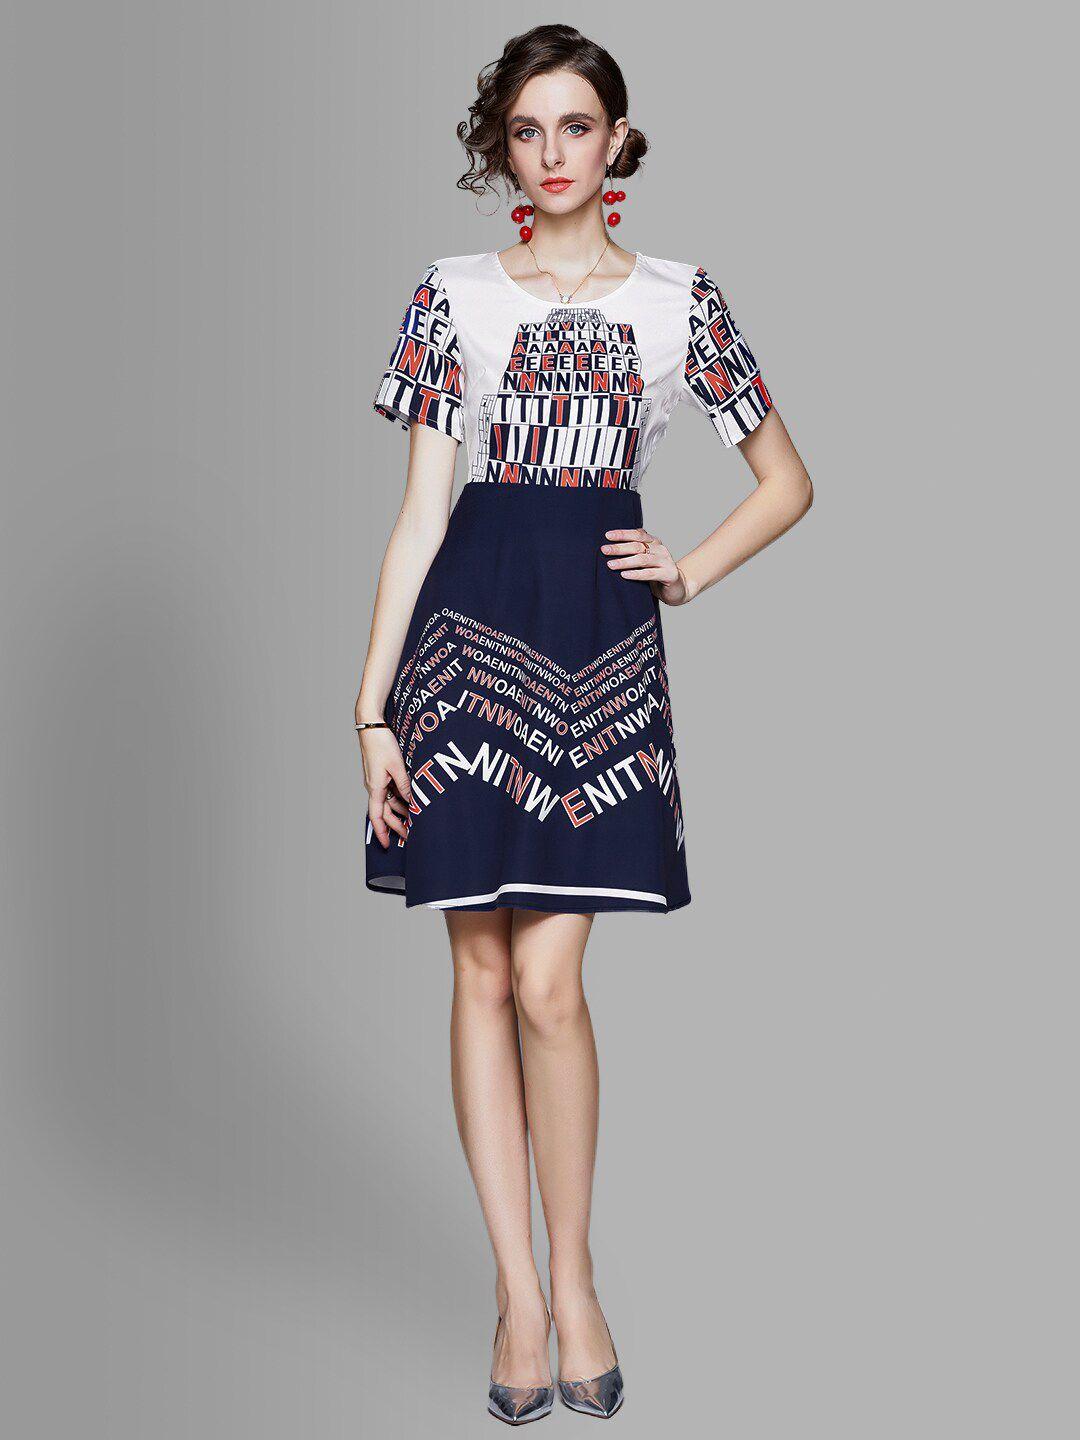 jc collection navy blue printed dress